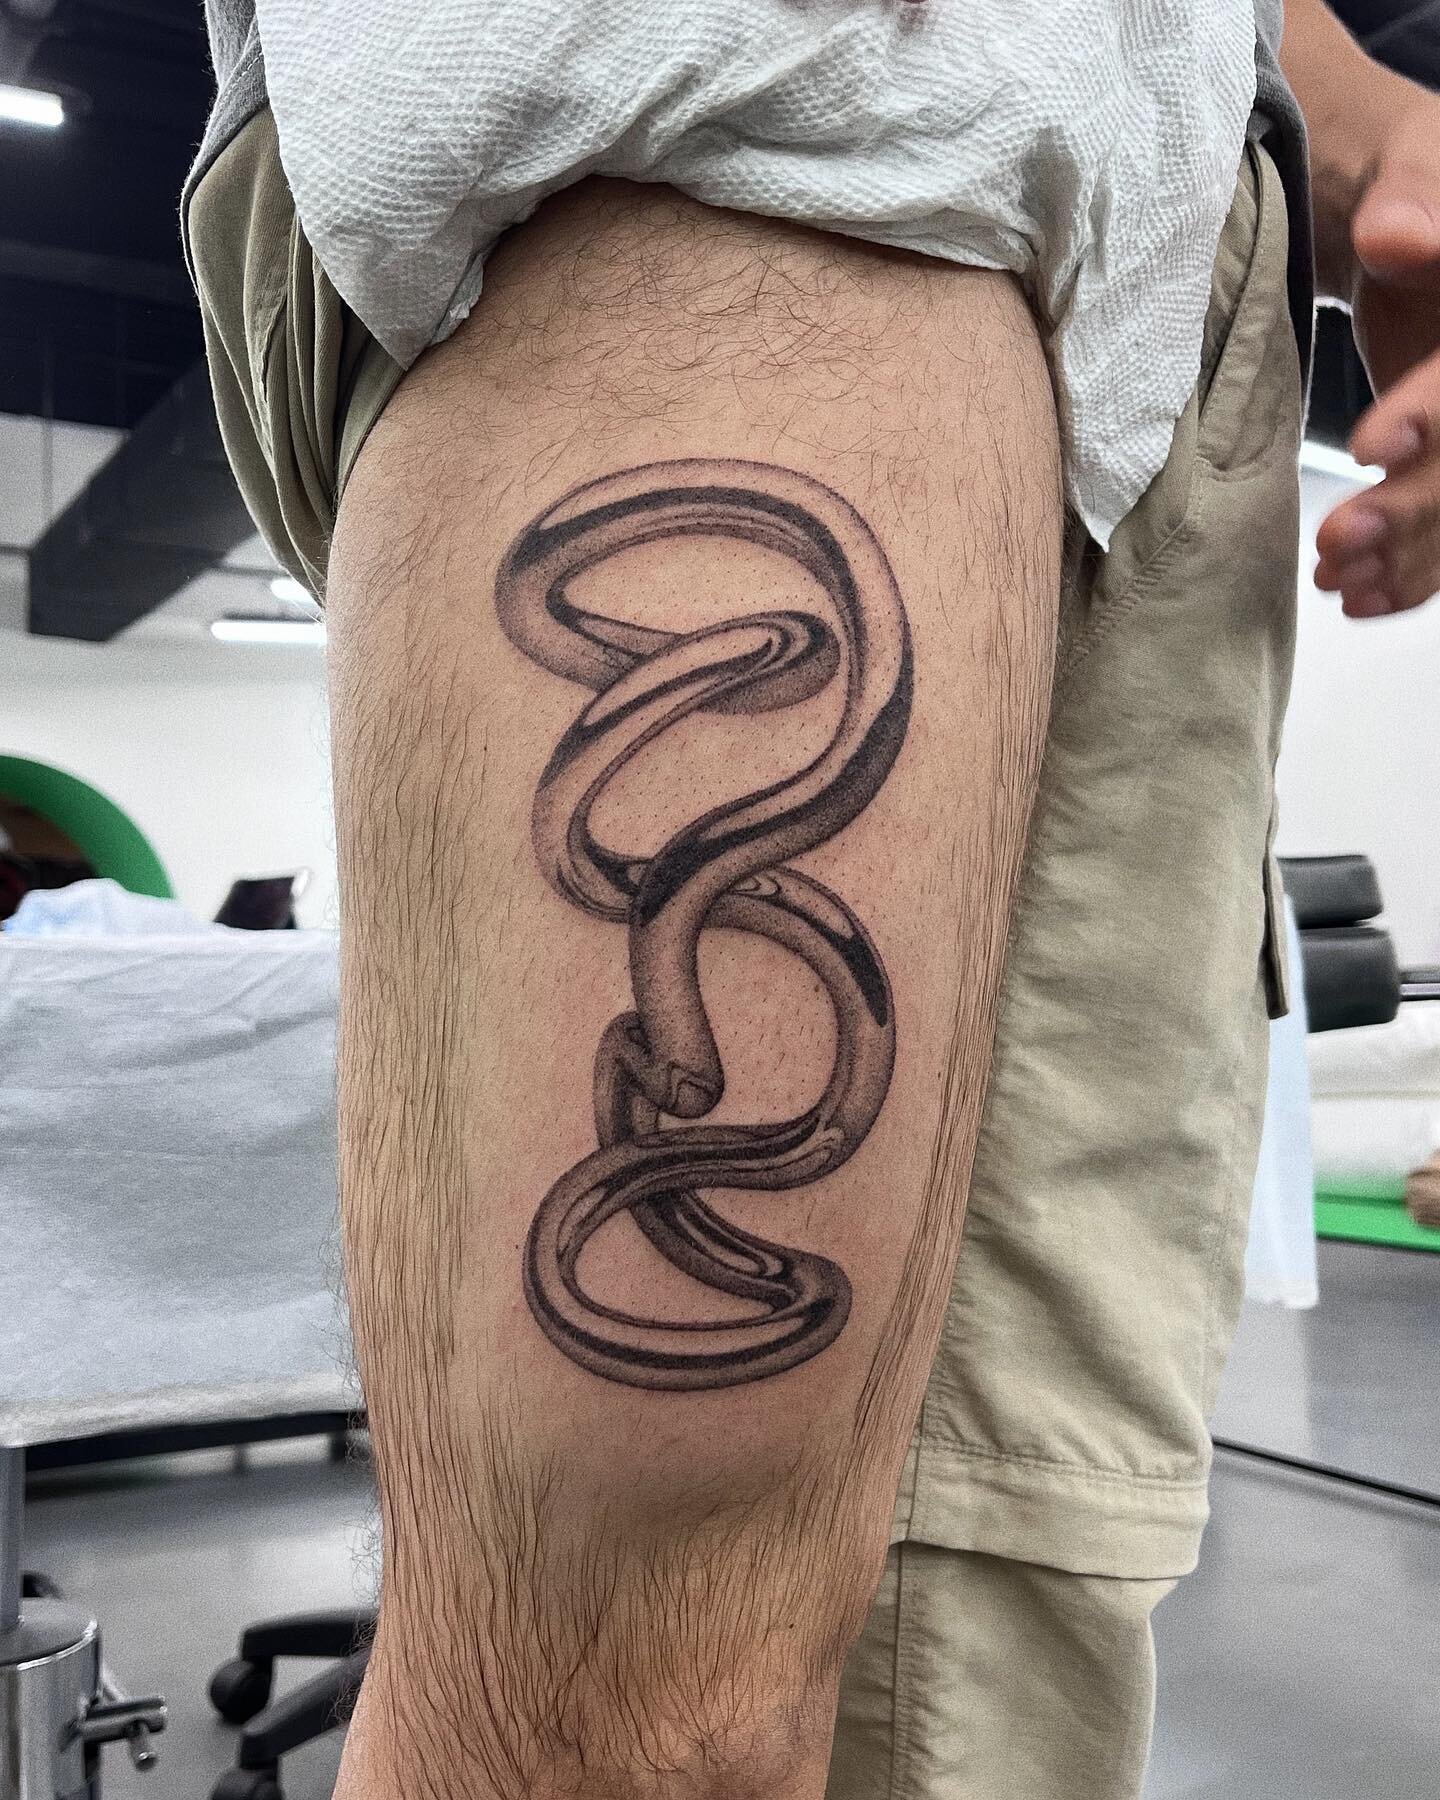 North face zip off pants 🤝 thigh tattoos. First tattoo for Jonathan. Thank you!